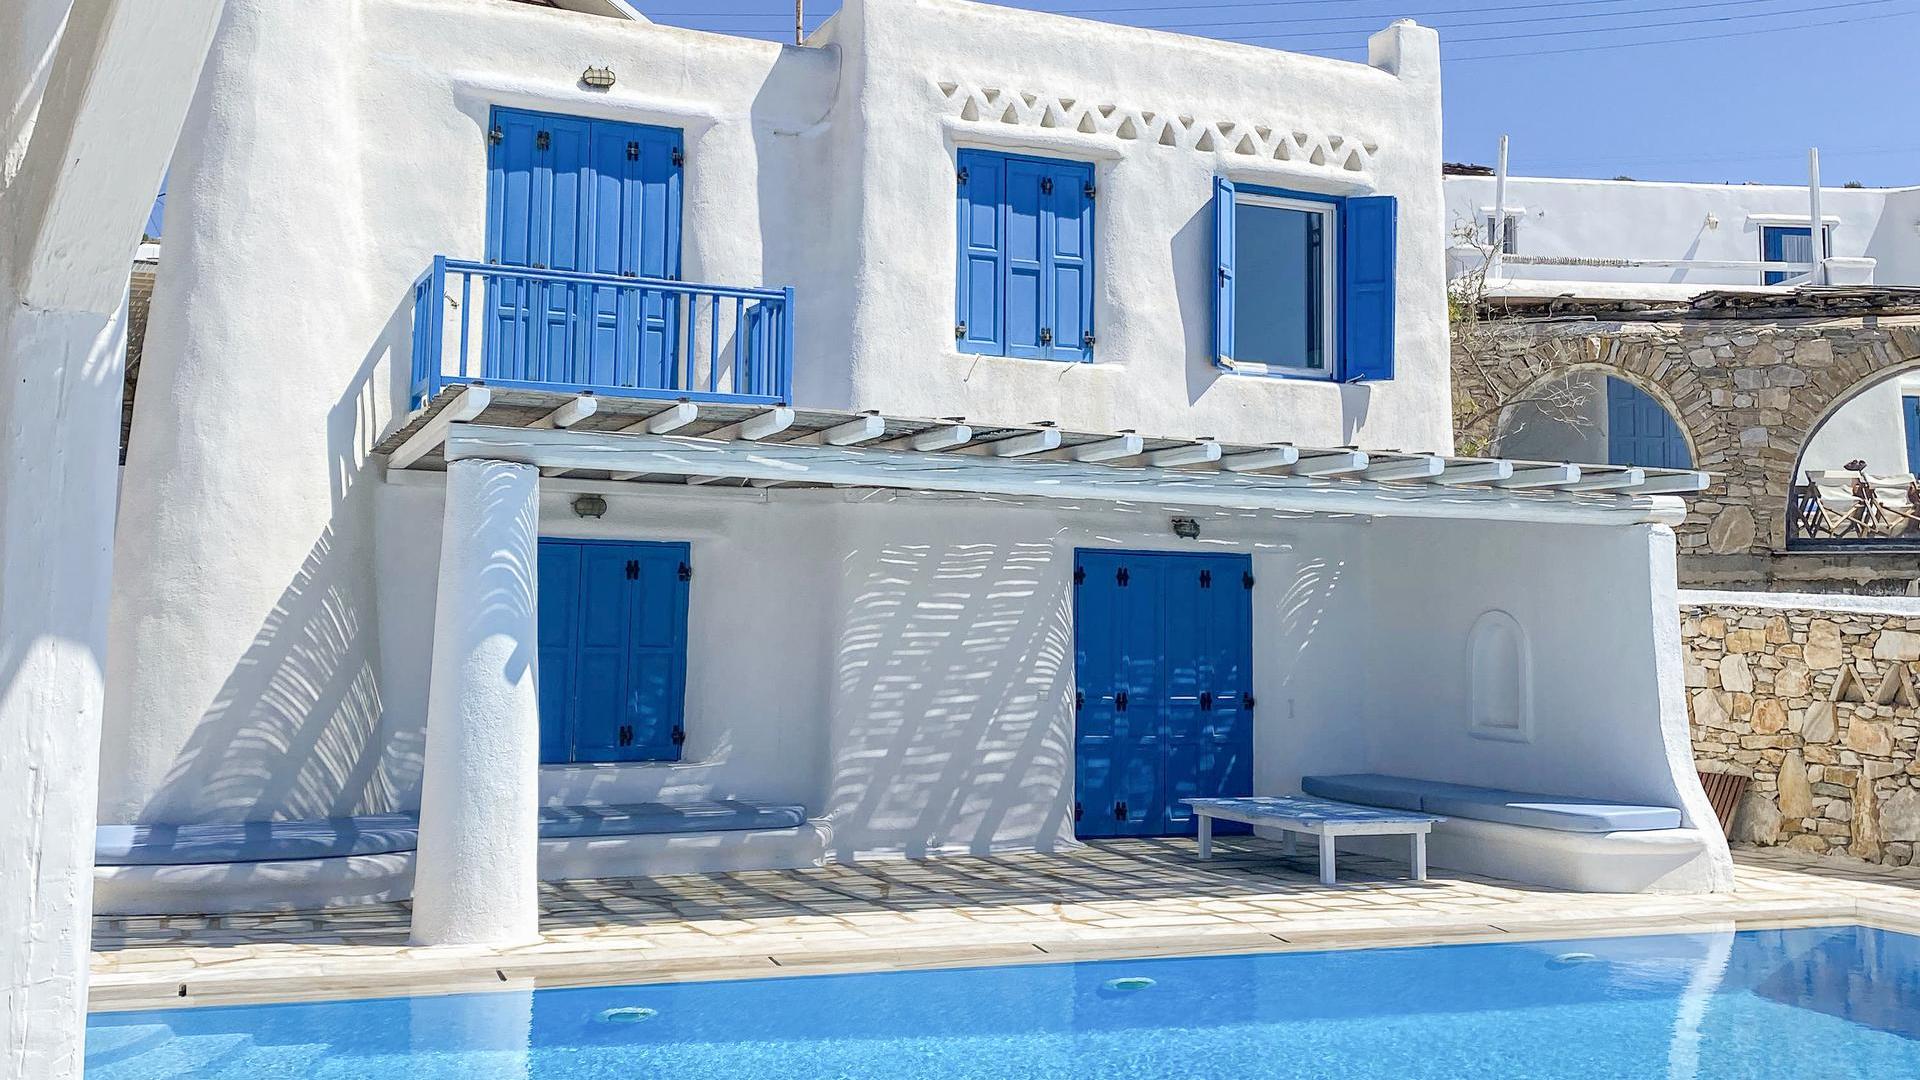 Blue Harmony Suites of Mykonos – Two bedroom Apartment  for 5 guests